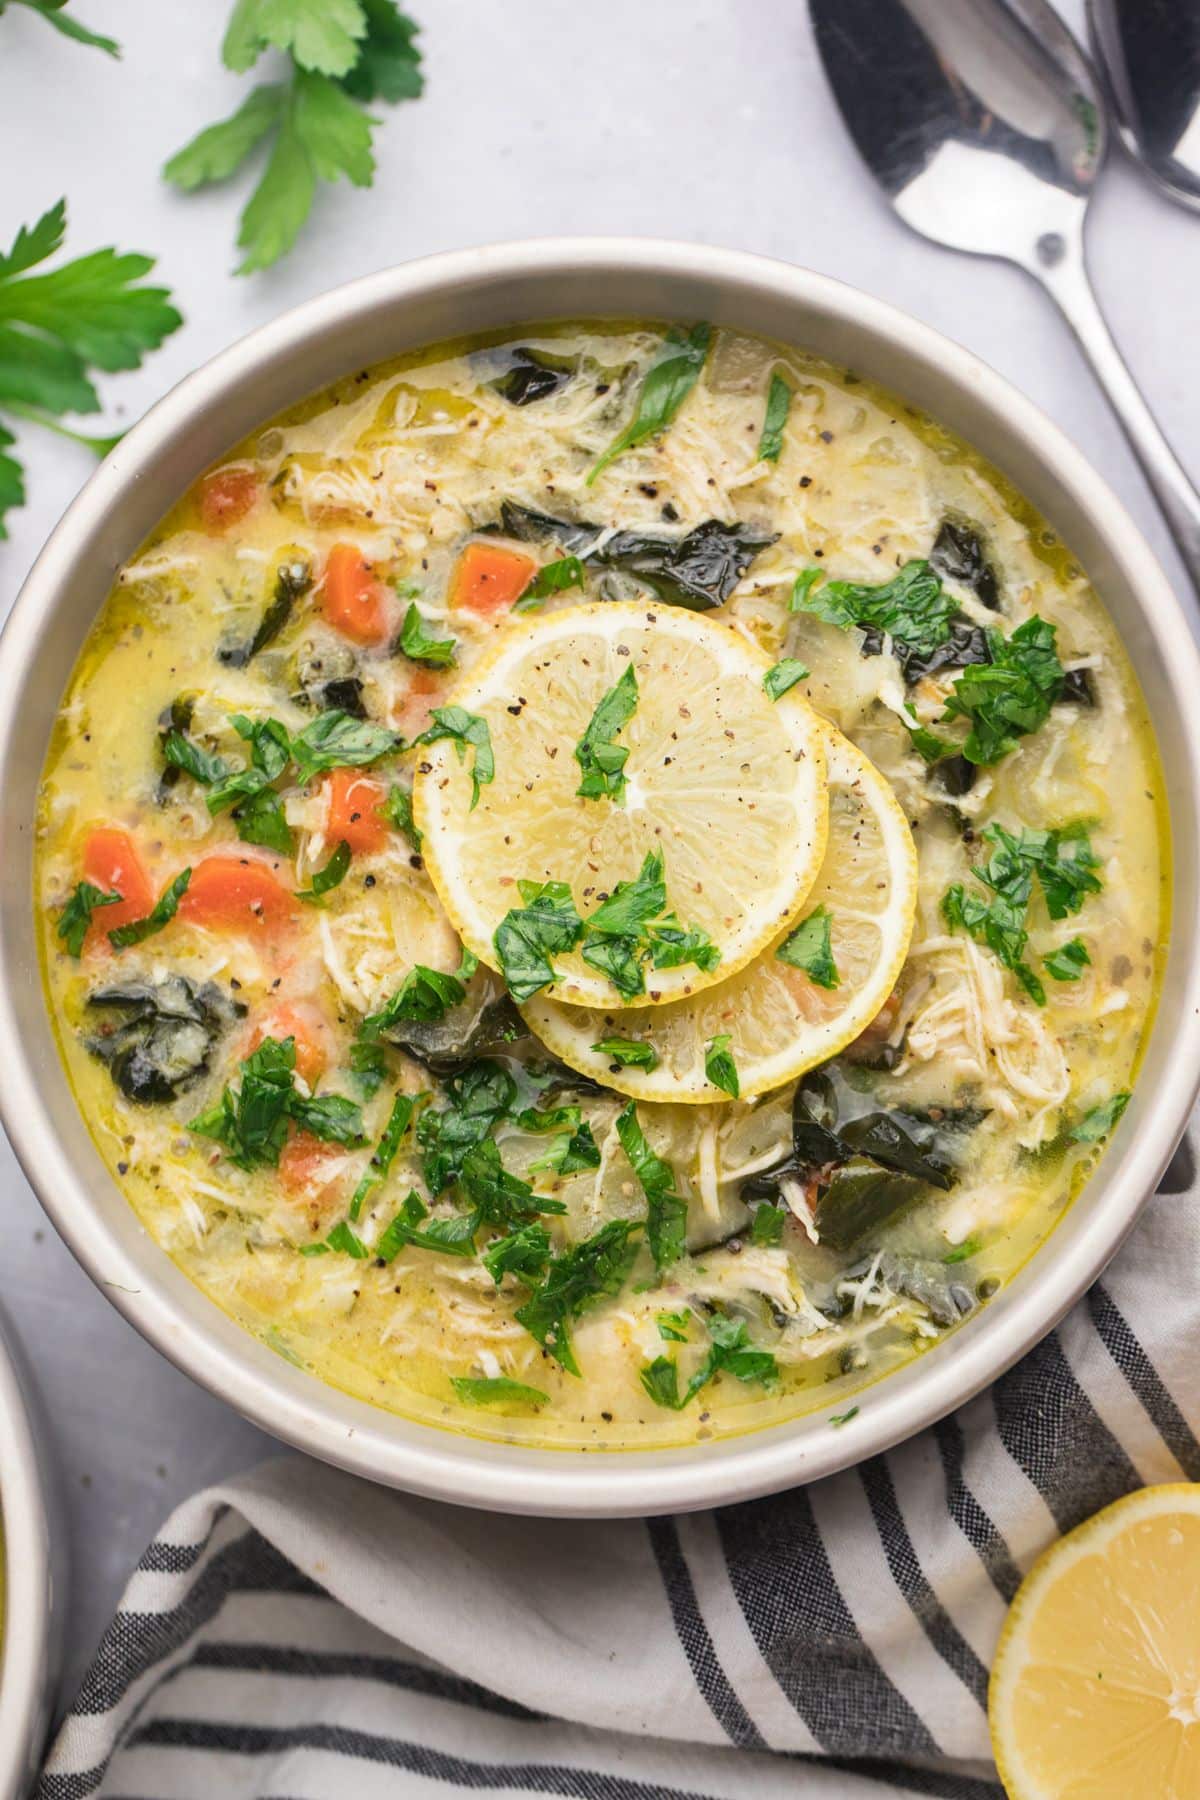 A bowl of healthy Greek Lemon Chicken Soup on the table with a gray and white towel and lemons.